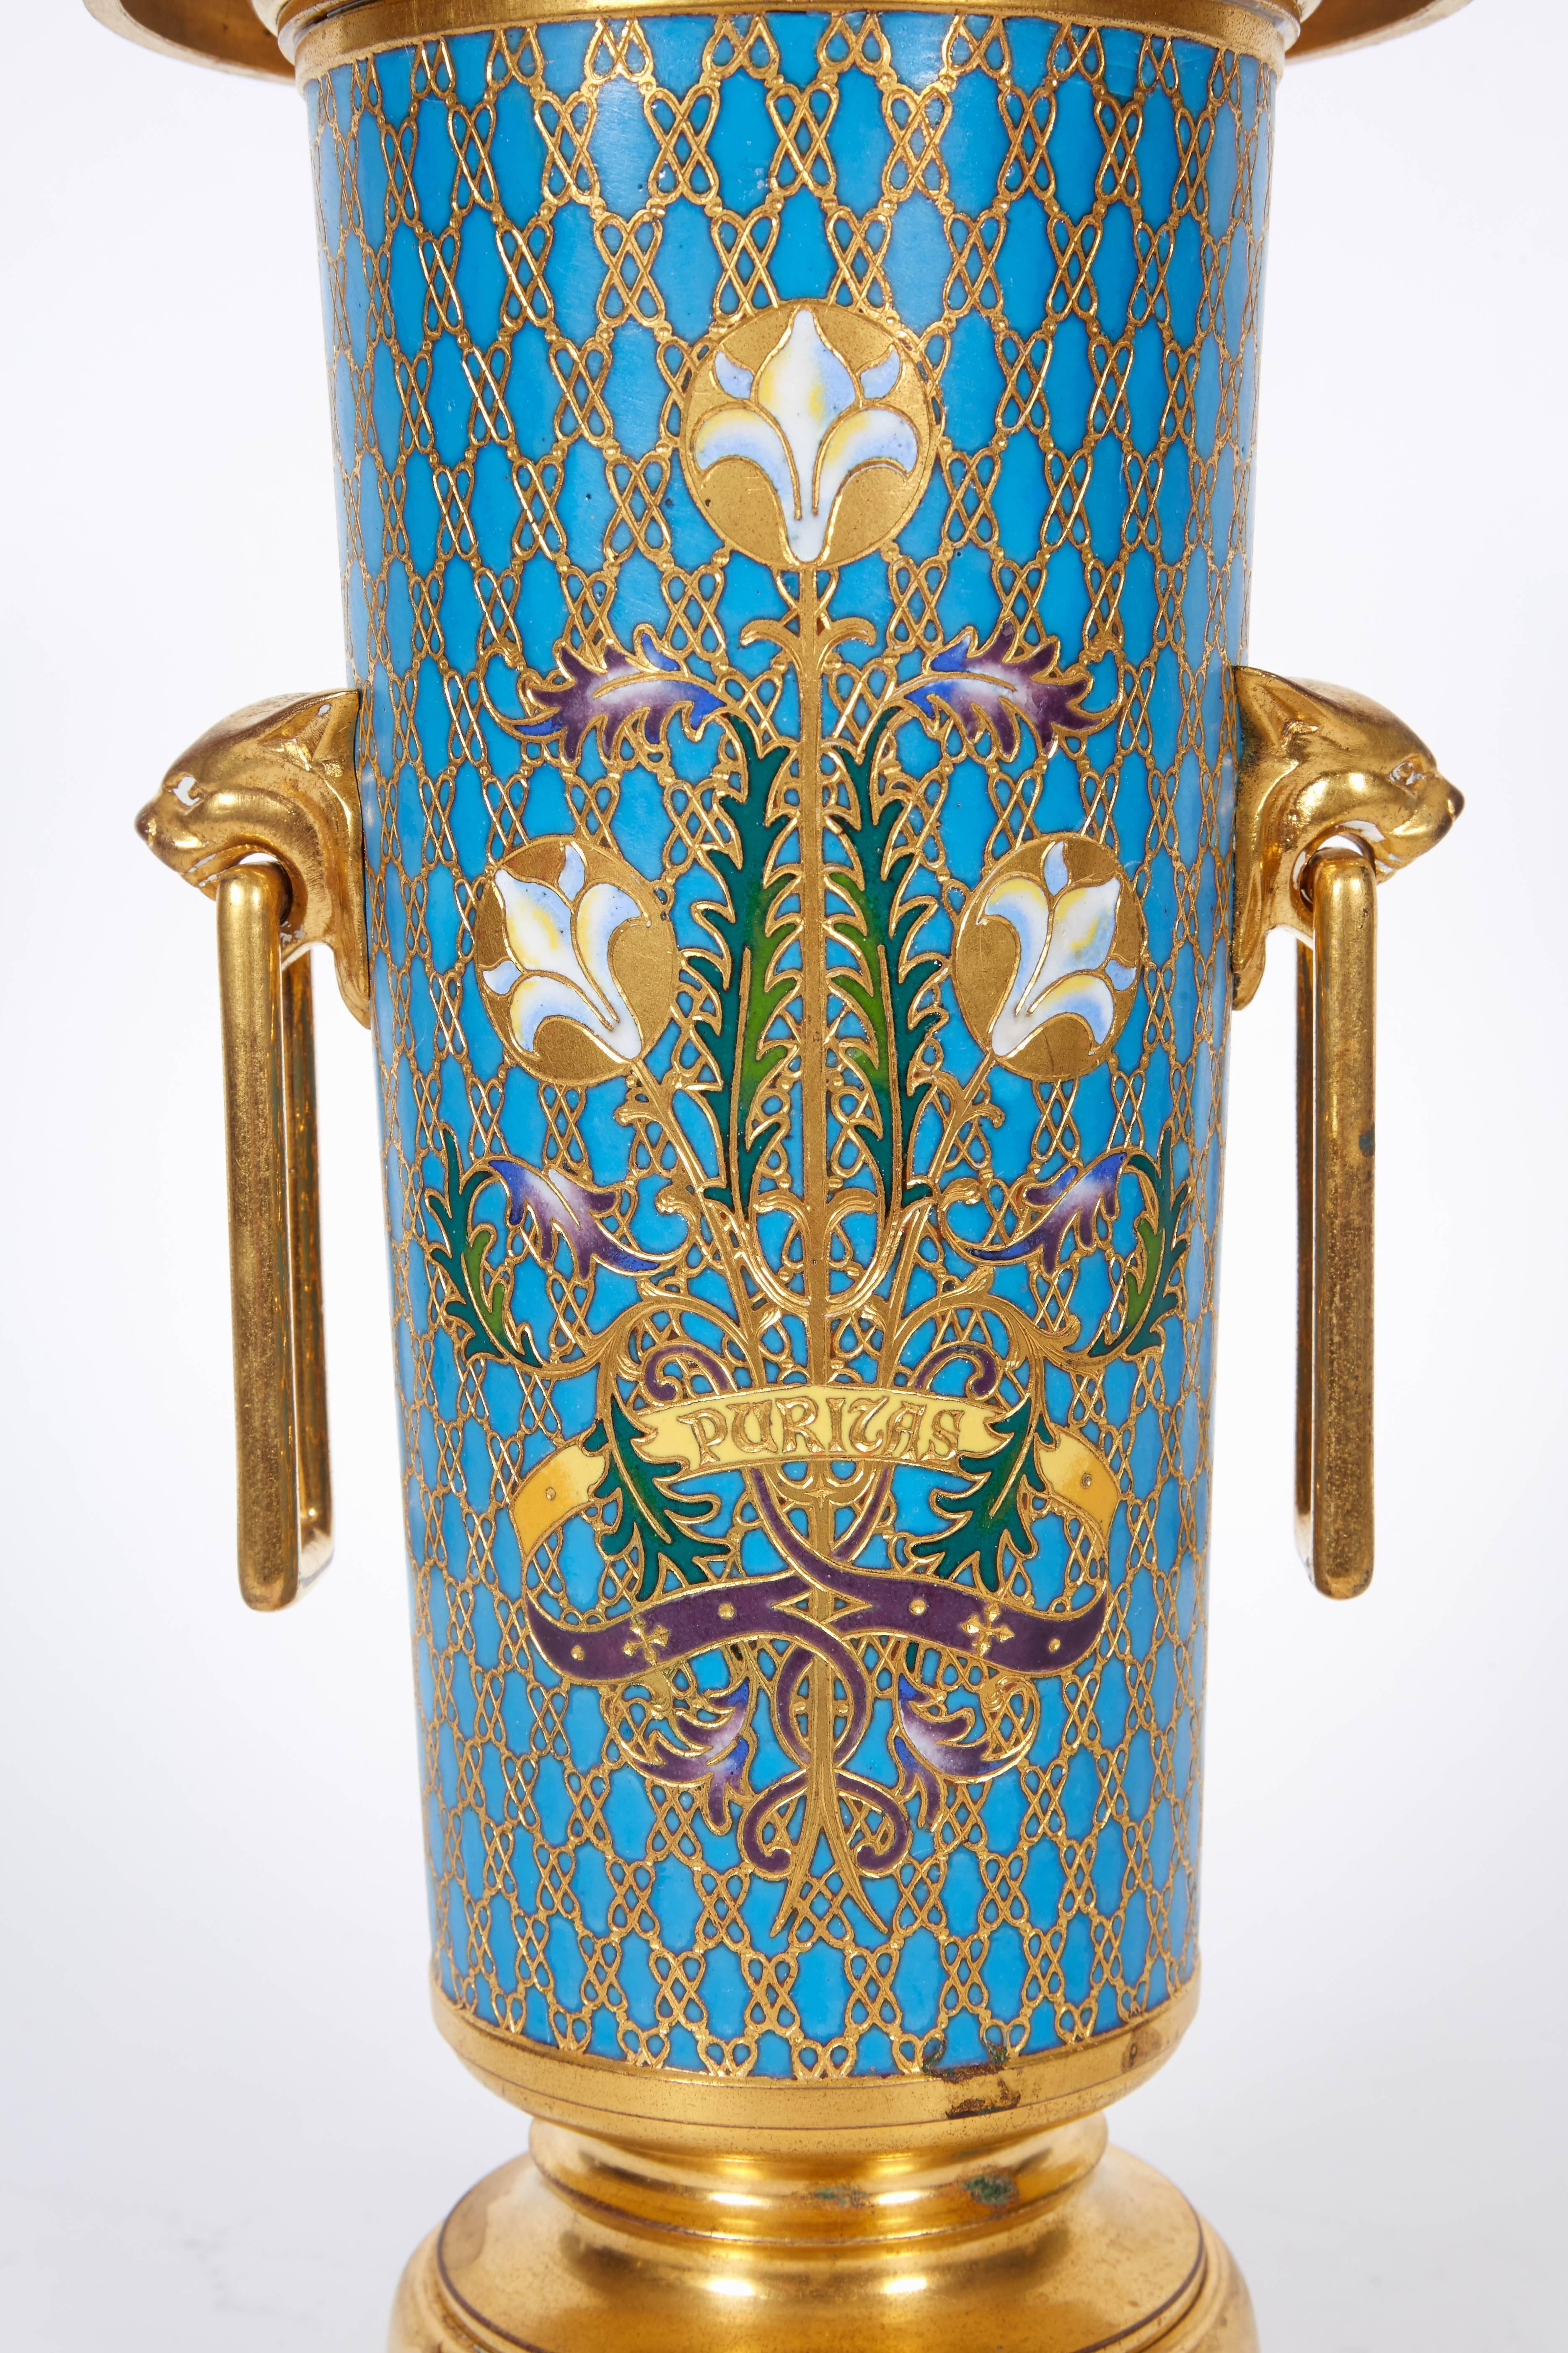 A large French gilt bronze and Champleve cloisonne enamel vase by Ferdinand Barbedienne, circa 1880.

Signed F. Barbedienne


Measures: 12